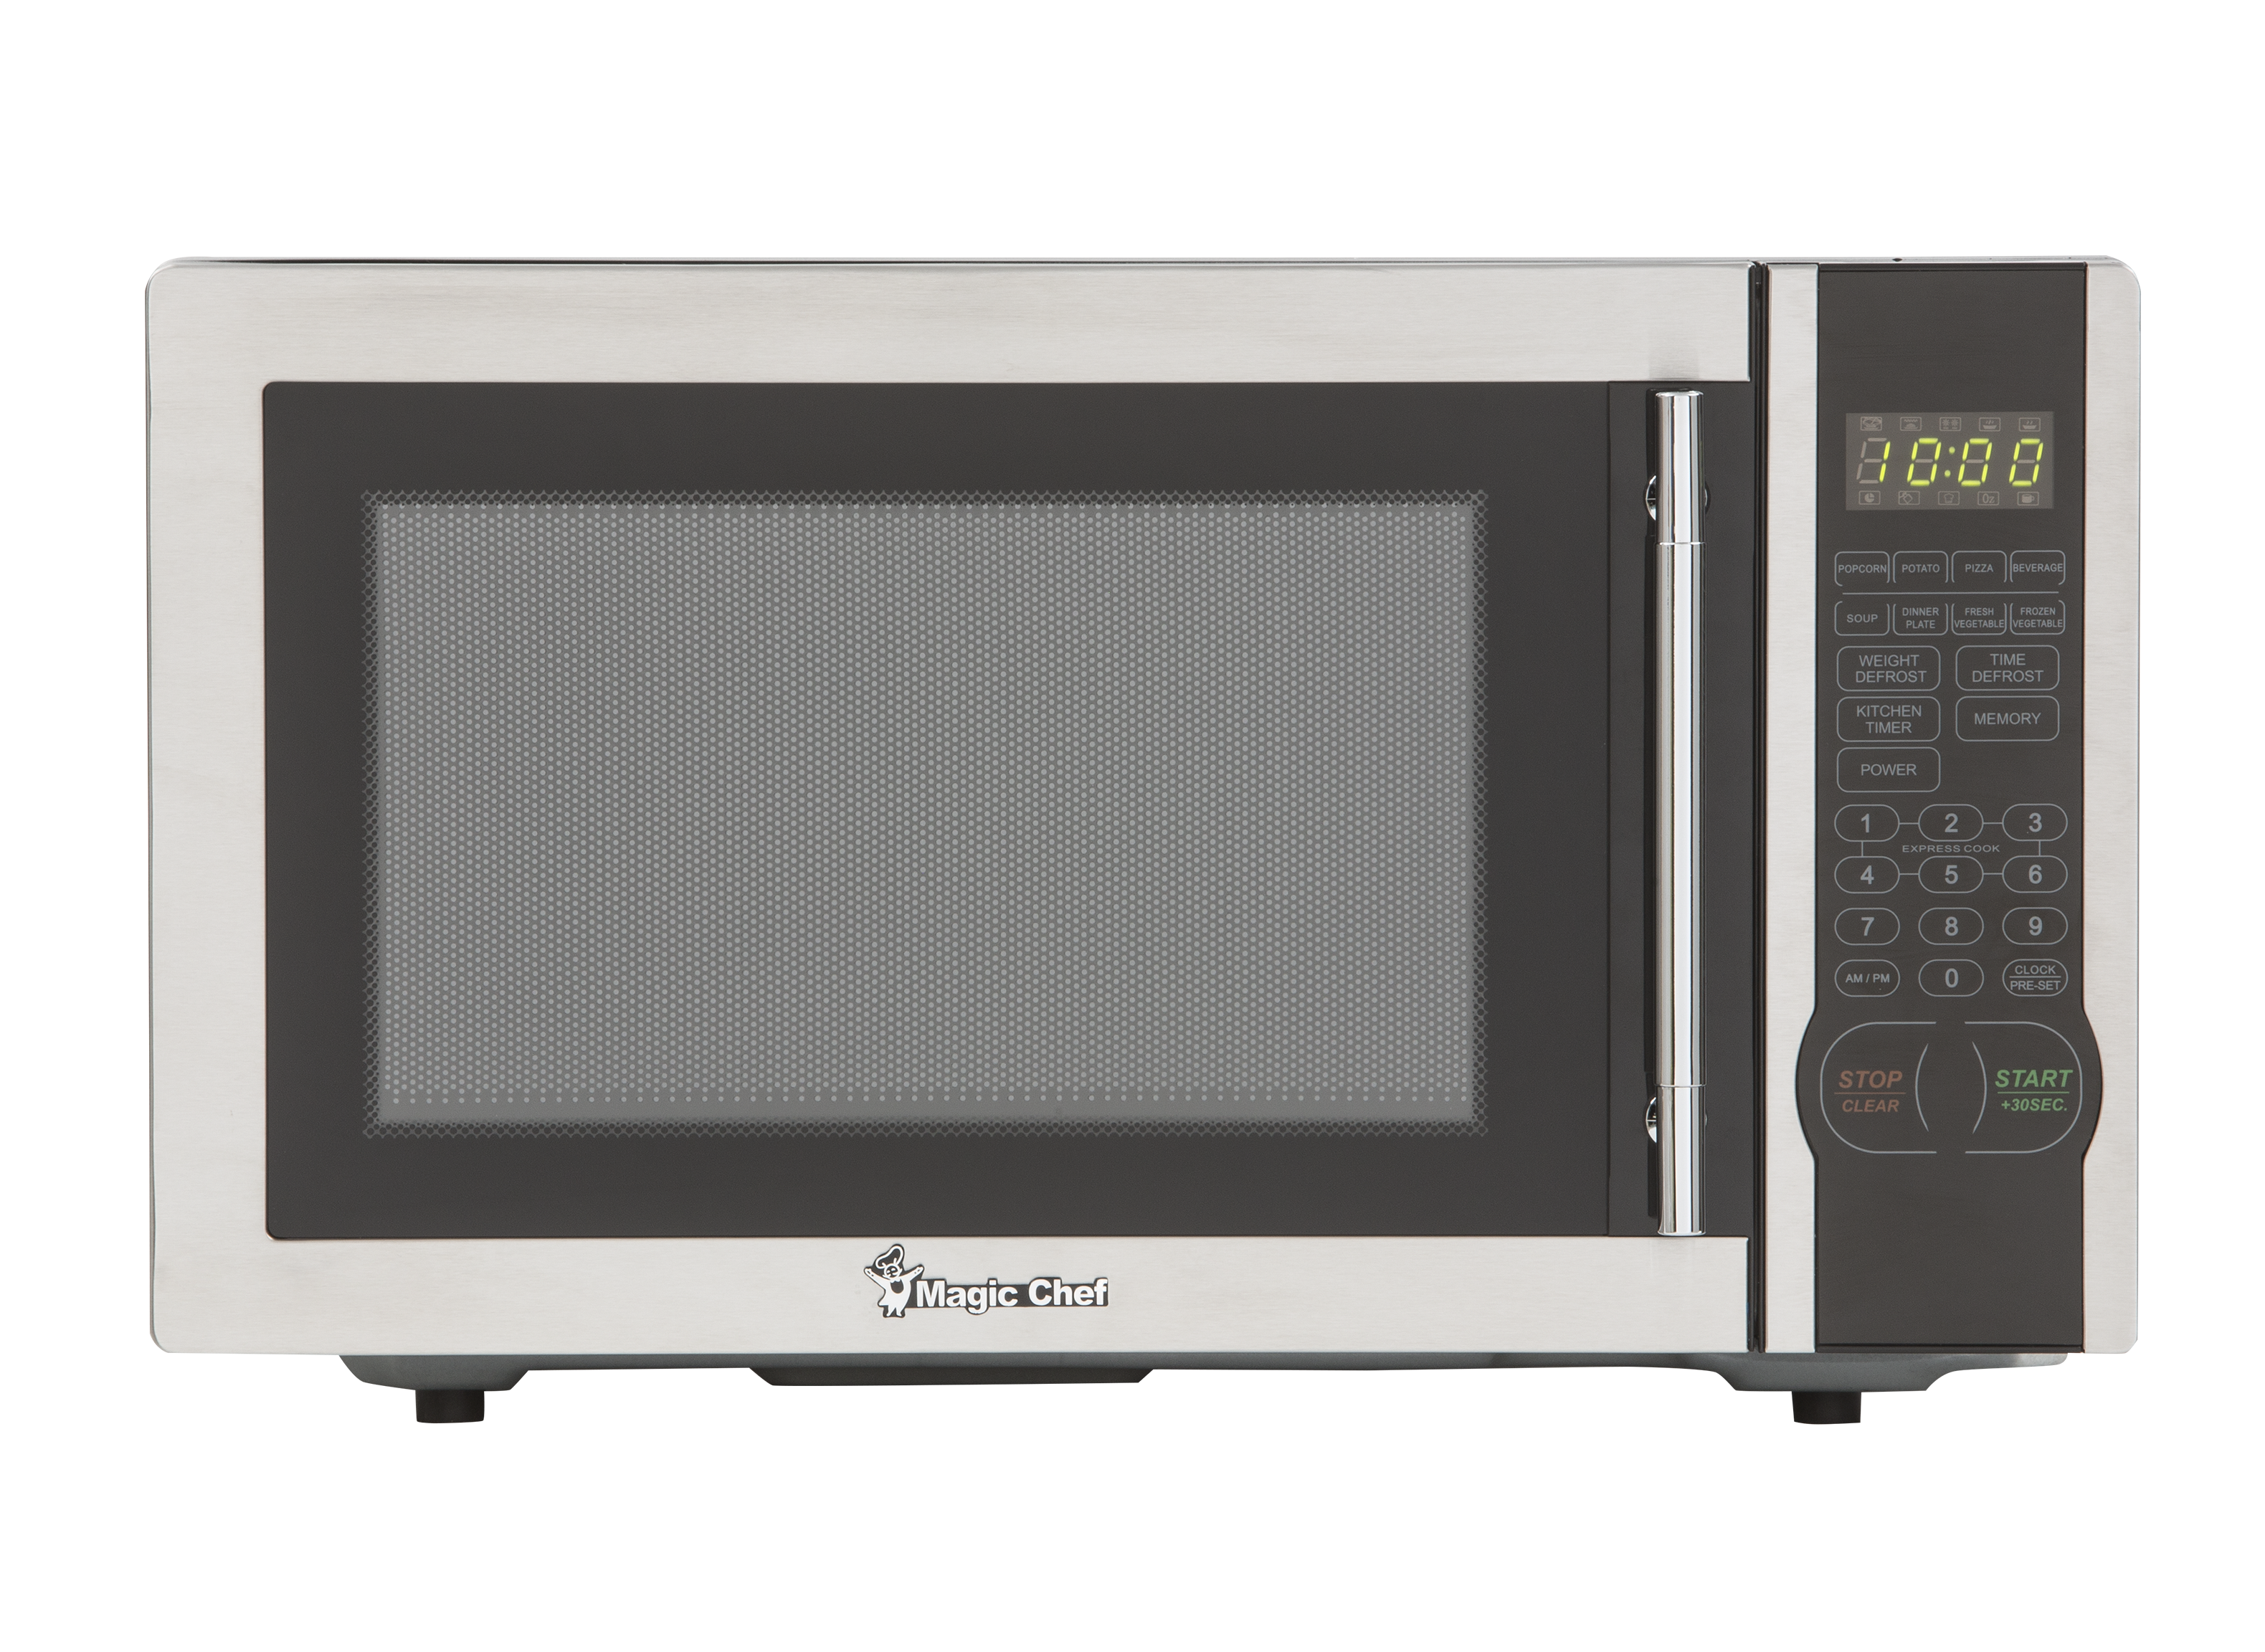 MCM1110ST by Magic Chef - 1.1 cu. ft. Countertop Microwave Oven